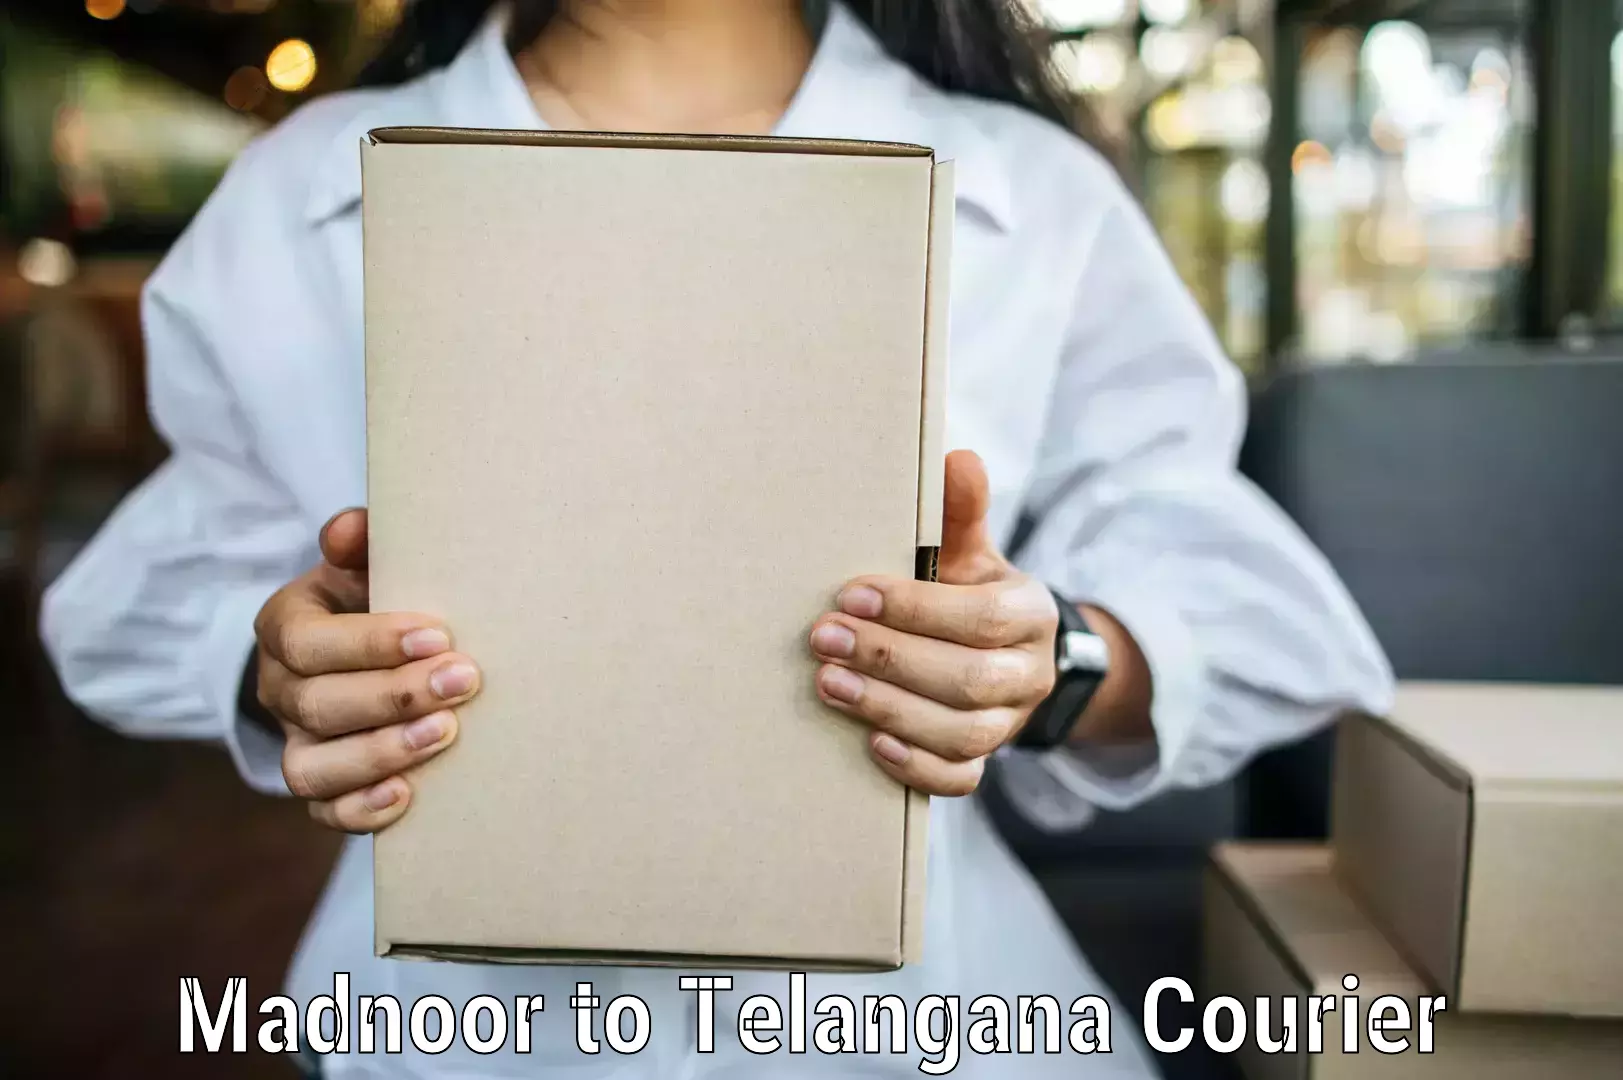 Courier service partnerships Madnoor to Bachupally